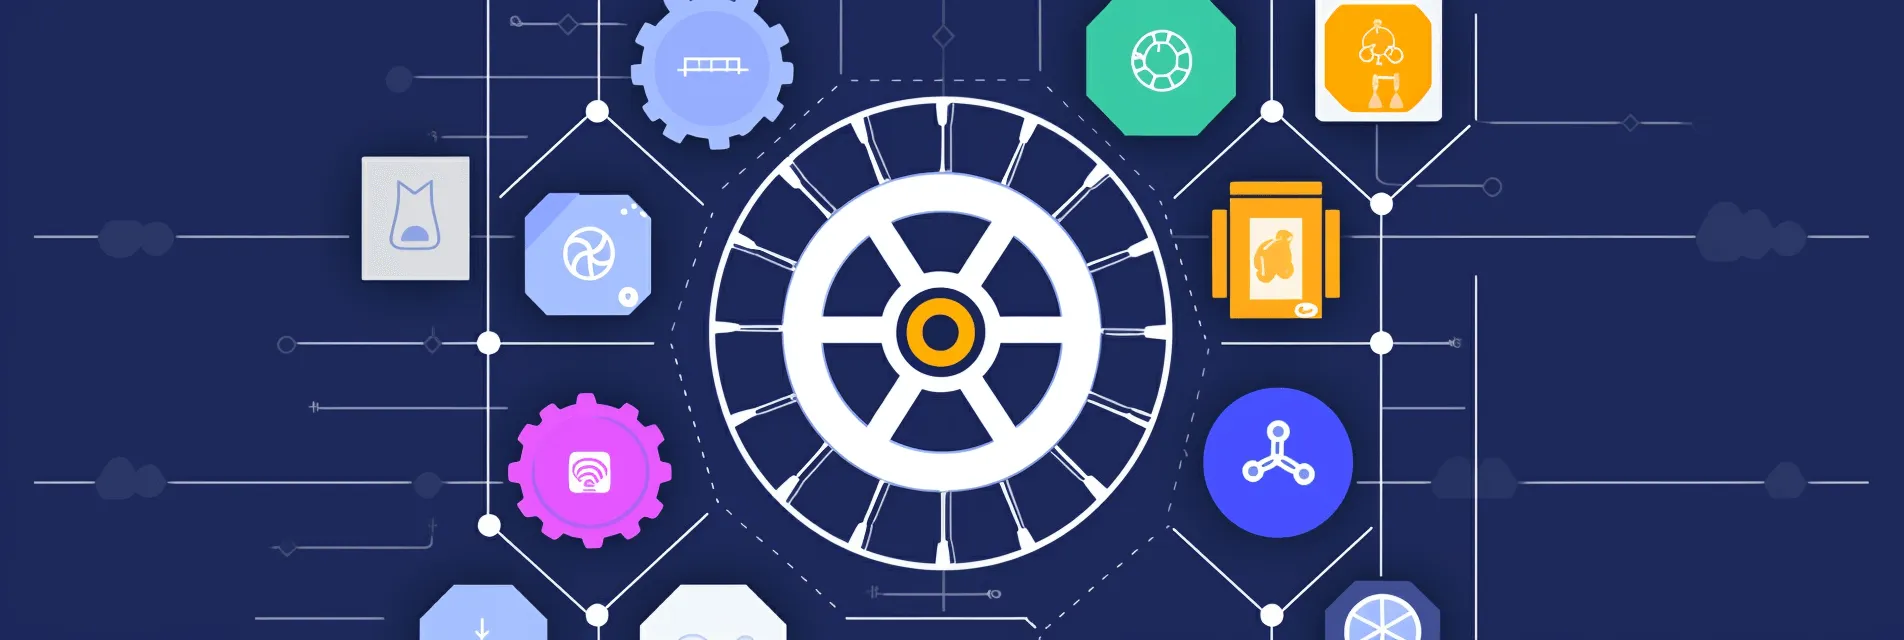 This article will guide you through the process of configuring Kubernetes Gateway API resources while leveraging Cilium's advanced load balancing capabilities.